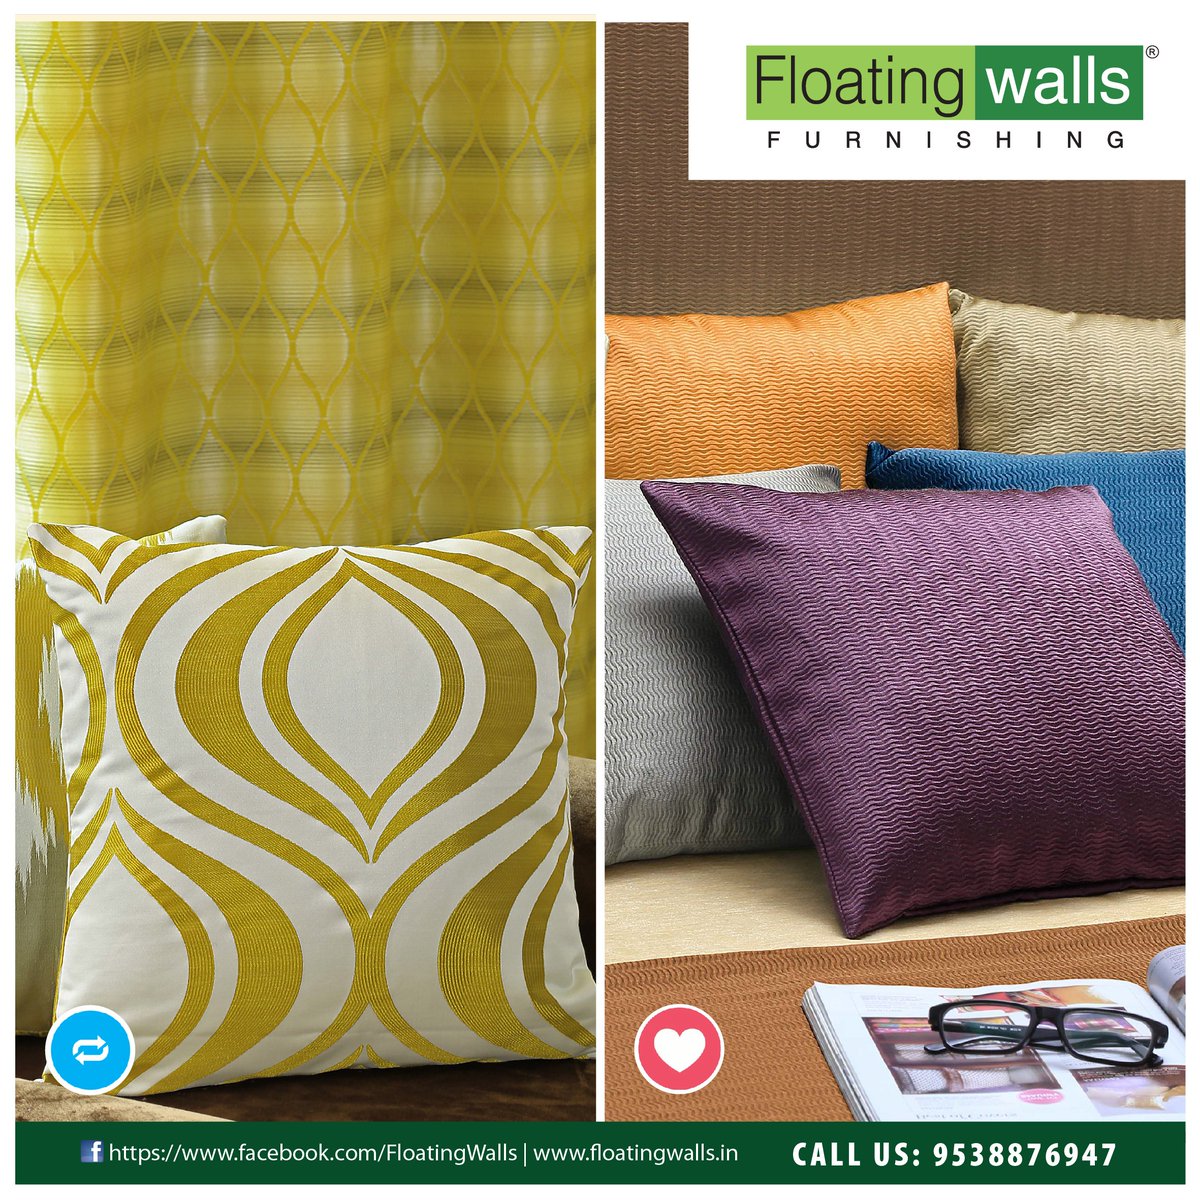 Tell us which one will you select for your home?
React with your preference for #UpholsteryDesign.  floatingwalls.in